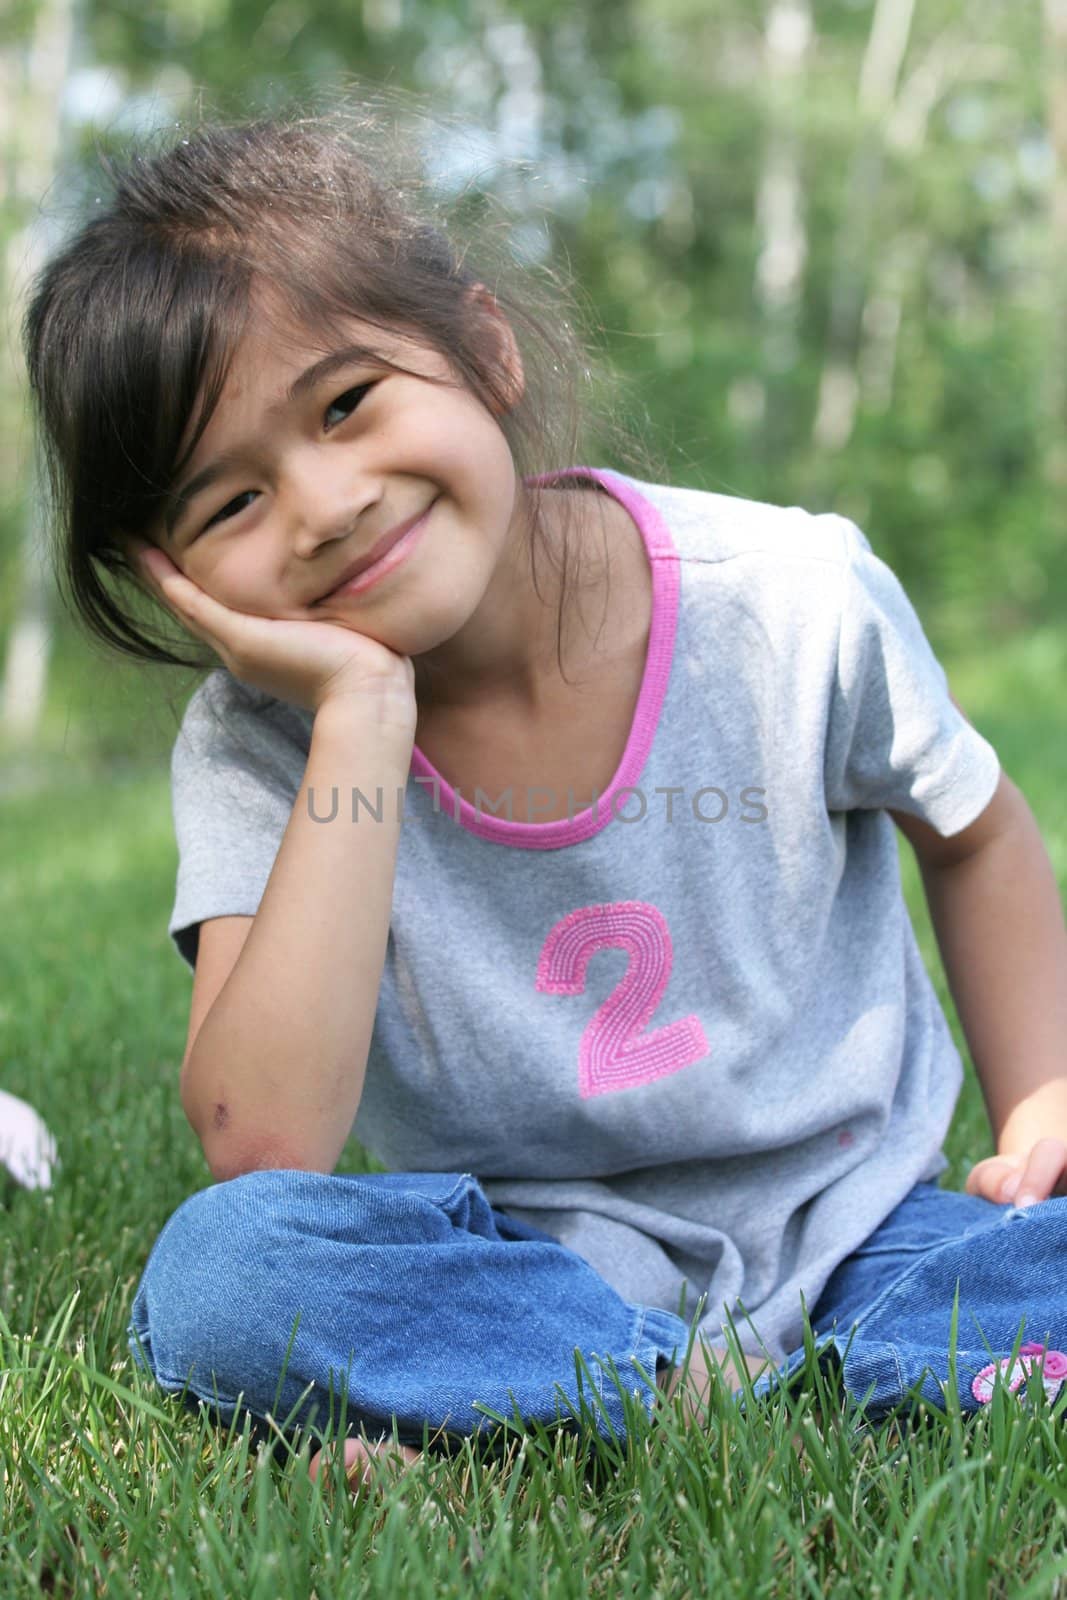 Child sitting on grass with head on hands, smiling. Part asian, scandinavian background.